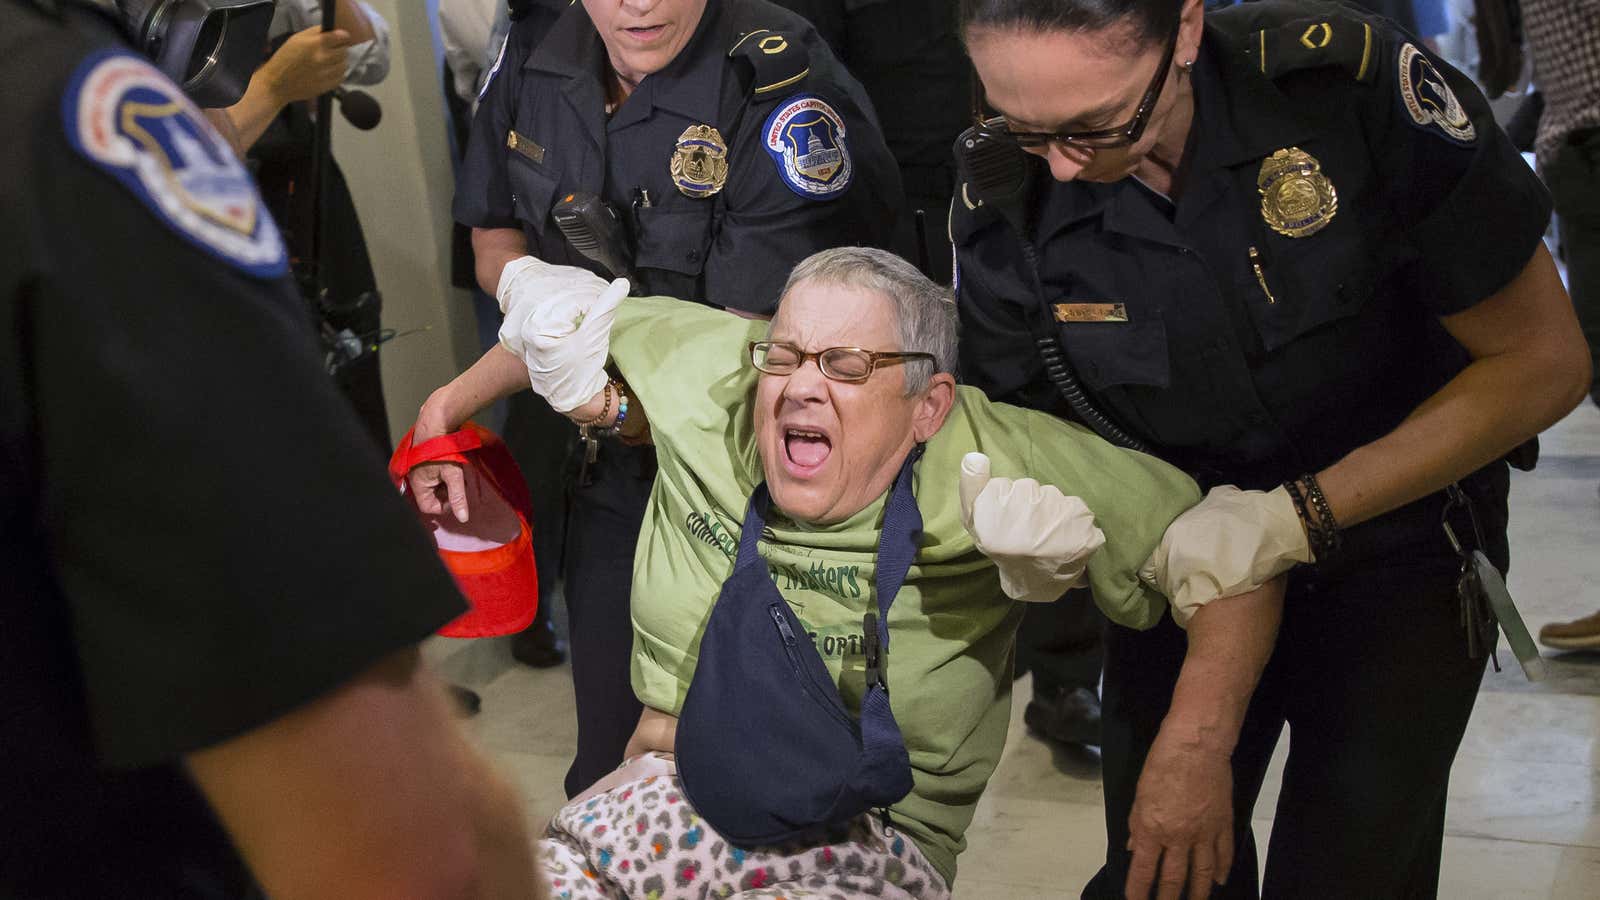 A protestor is carried away from Senate majority leader Mitch McConnell’s office on June 22.